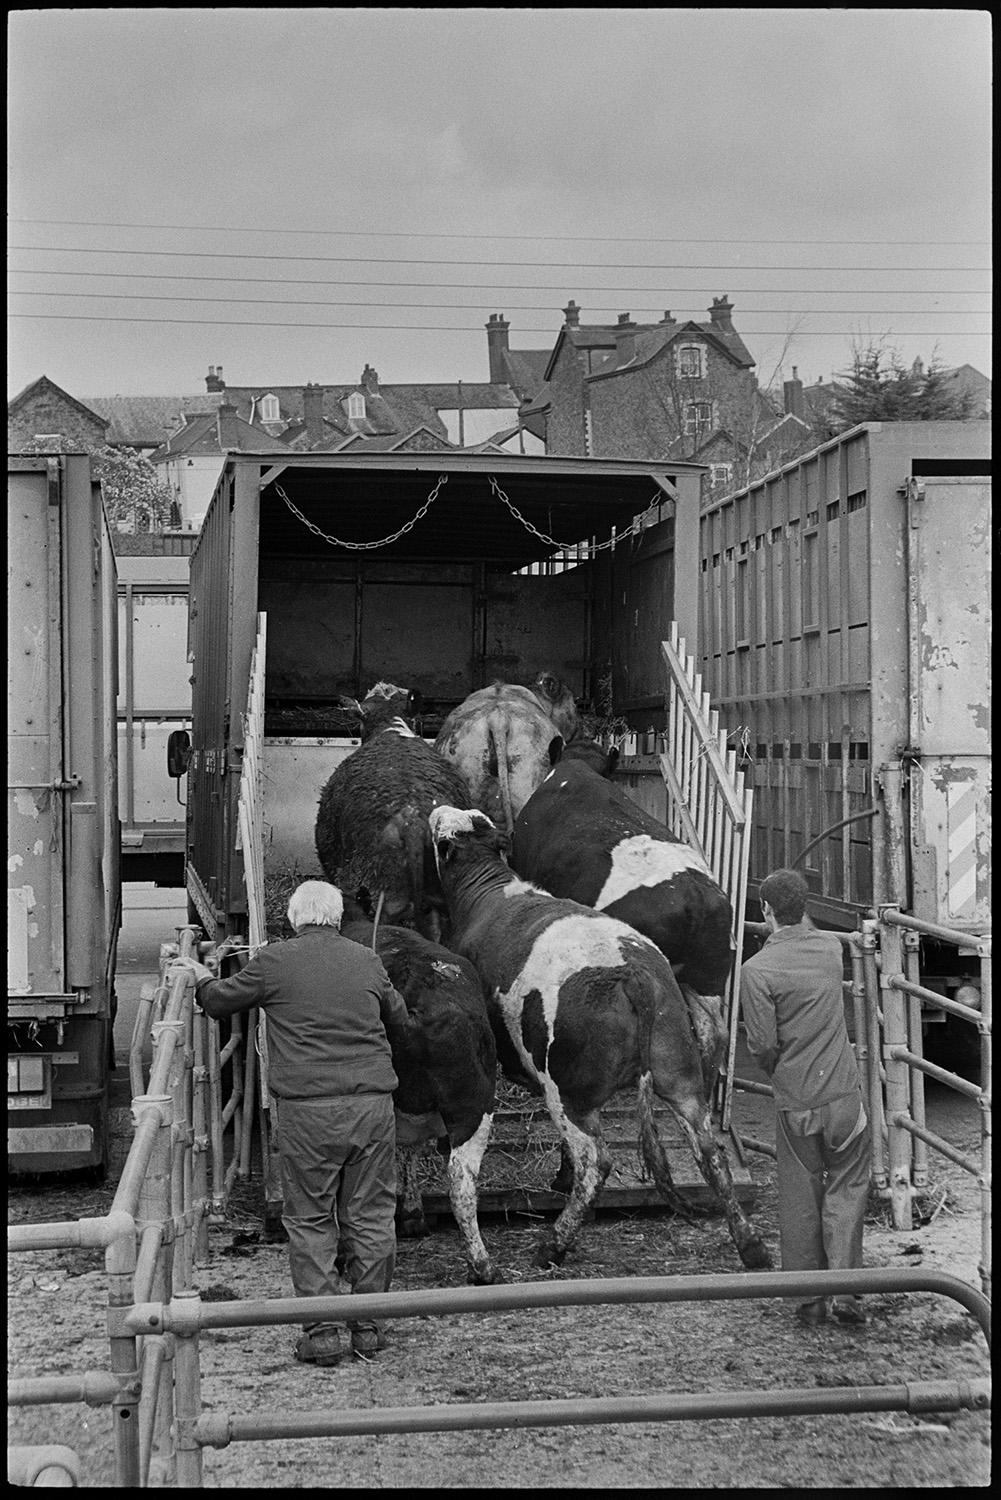 Sheep being loaded and unloaded at market. Lorries parked.
[Cattle being loaded in to the back of a lorry by two men at South Molton market.]